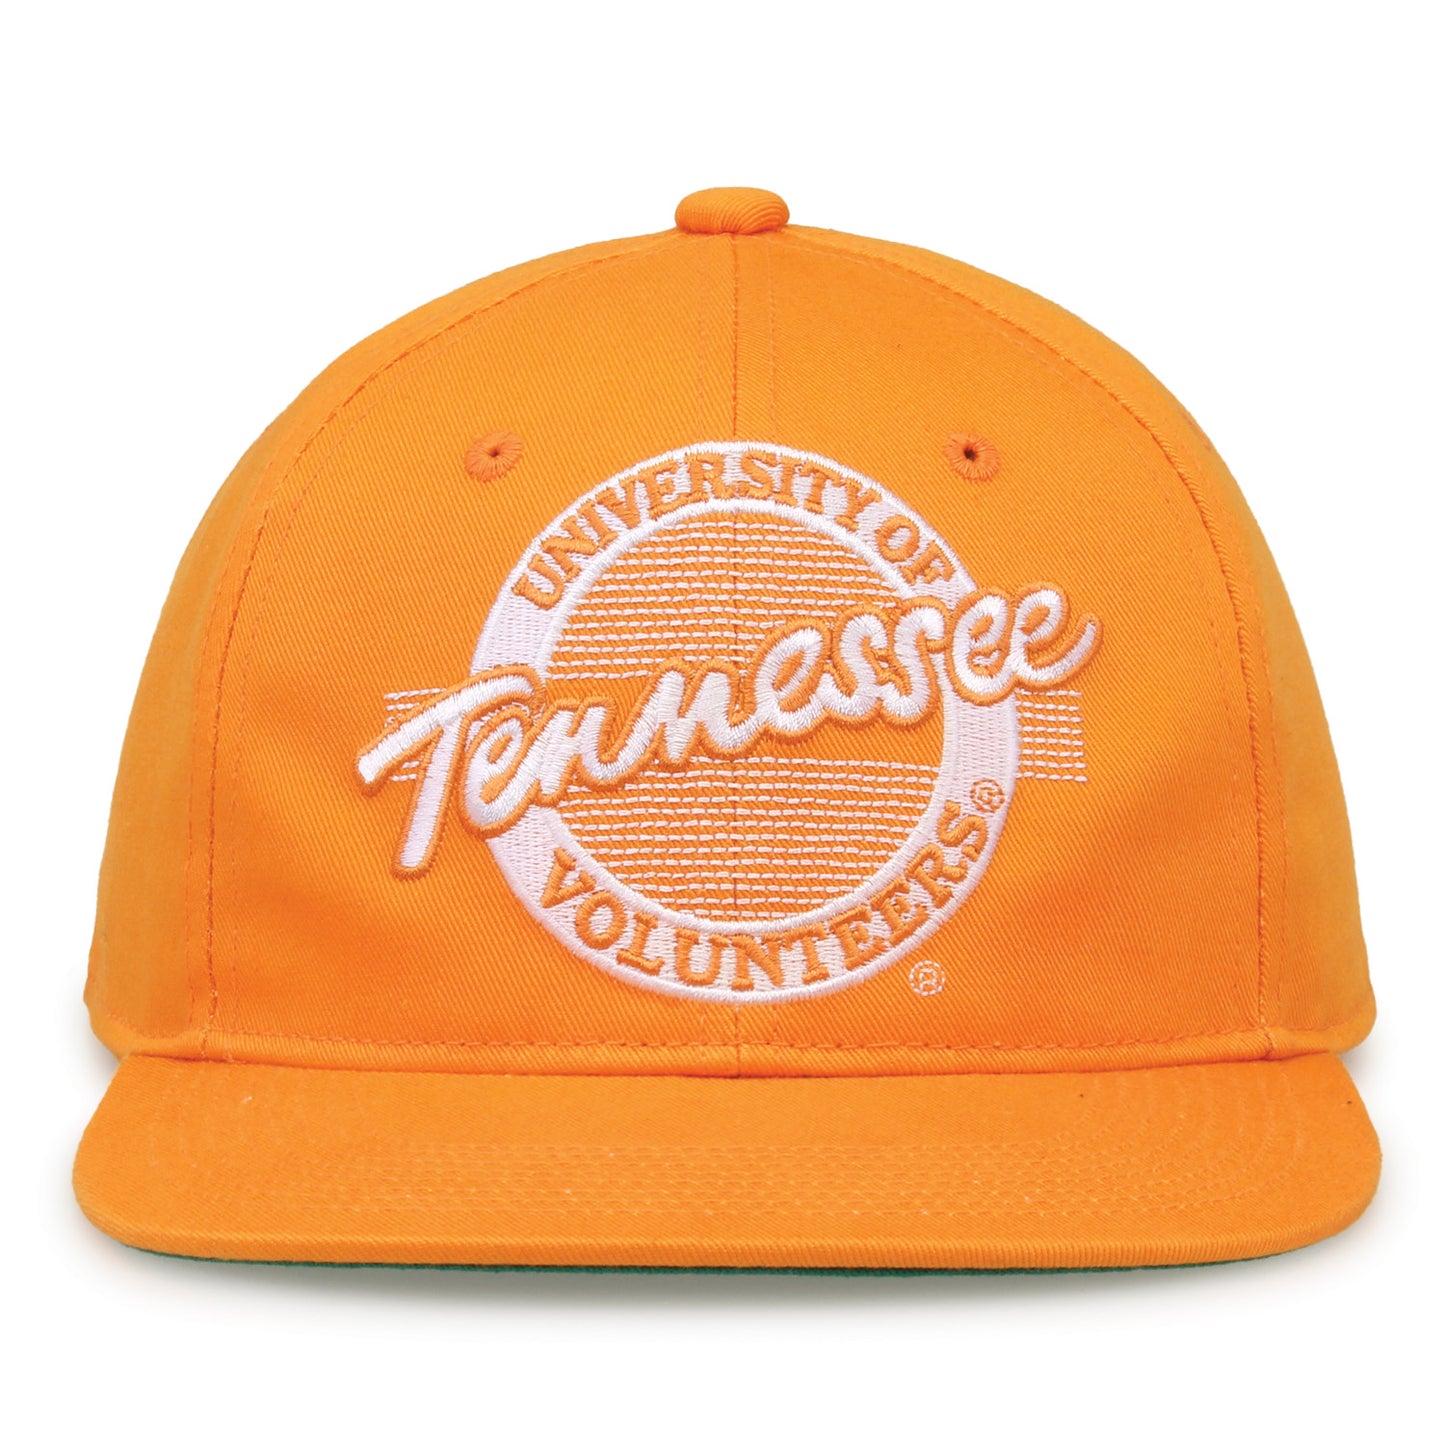 TENNESSEE' CIRCLE DESIGN